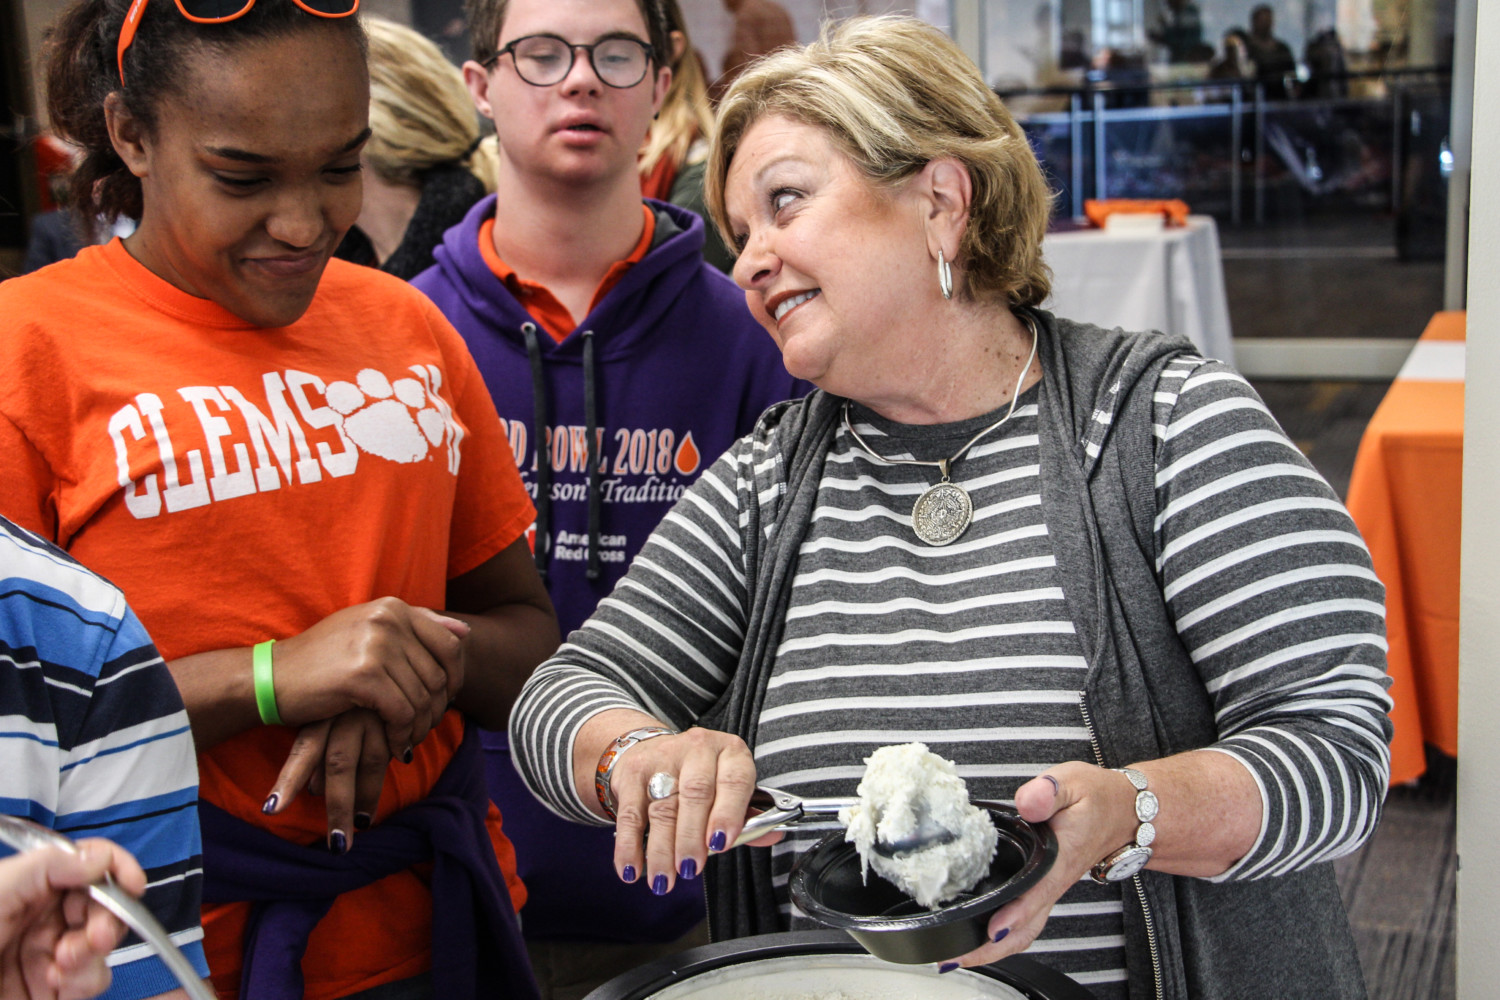 Vice President for Student Affairs Almeda Jacks serving ice cream to students from the ClemsonLIFE program.